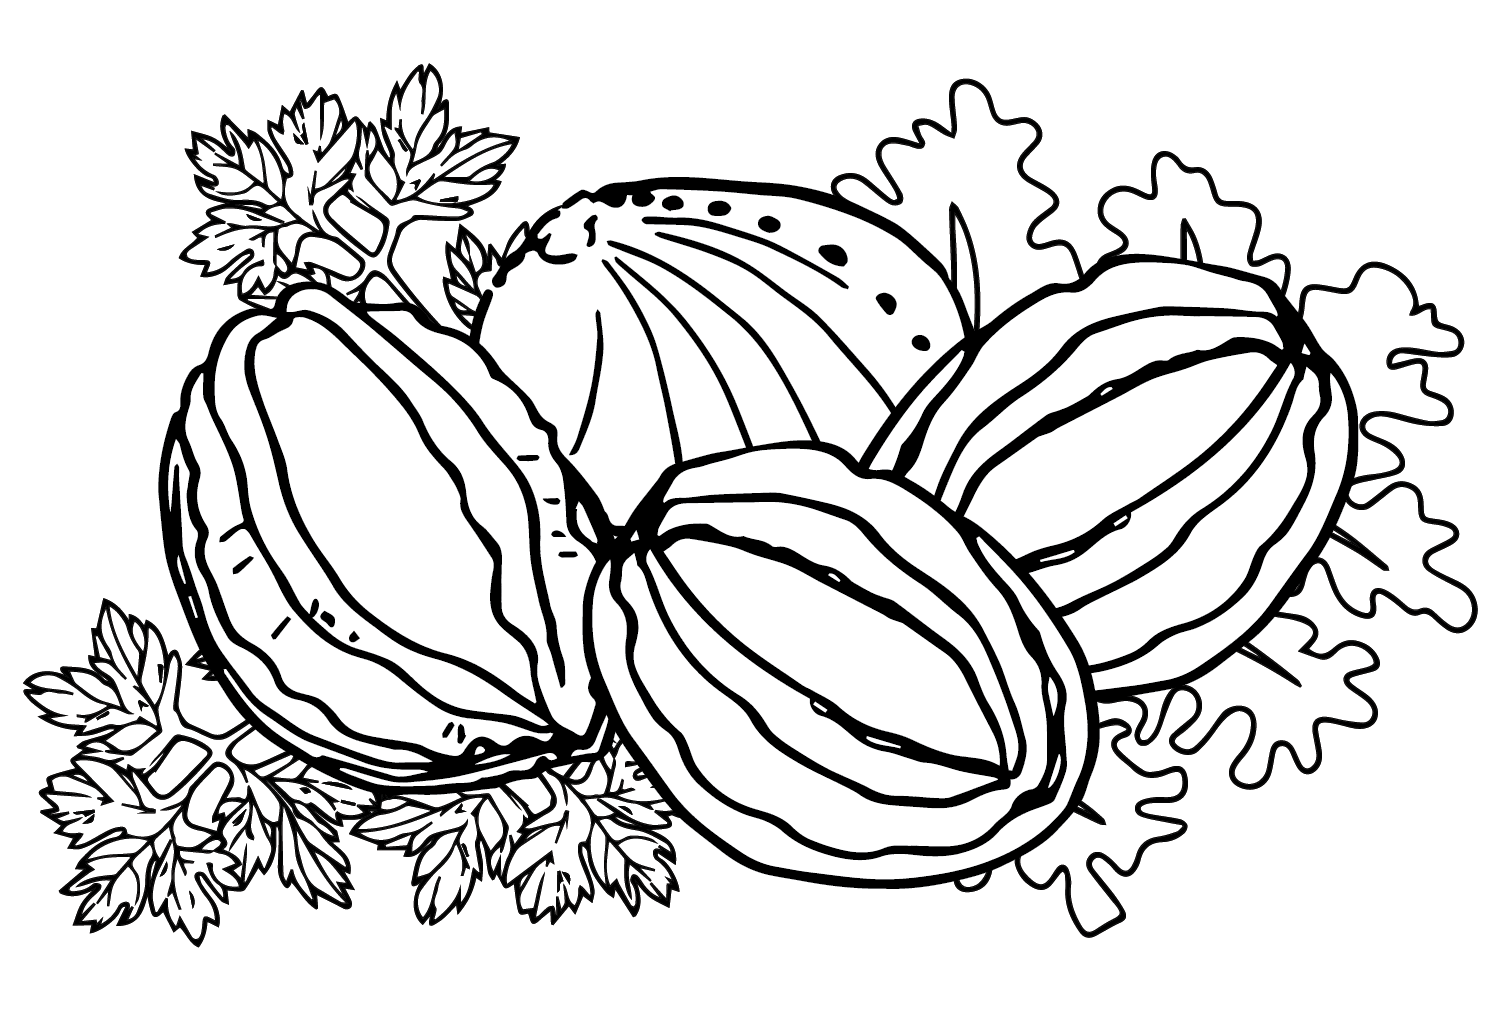 Fresh Abalone Coloring Page from Abalone